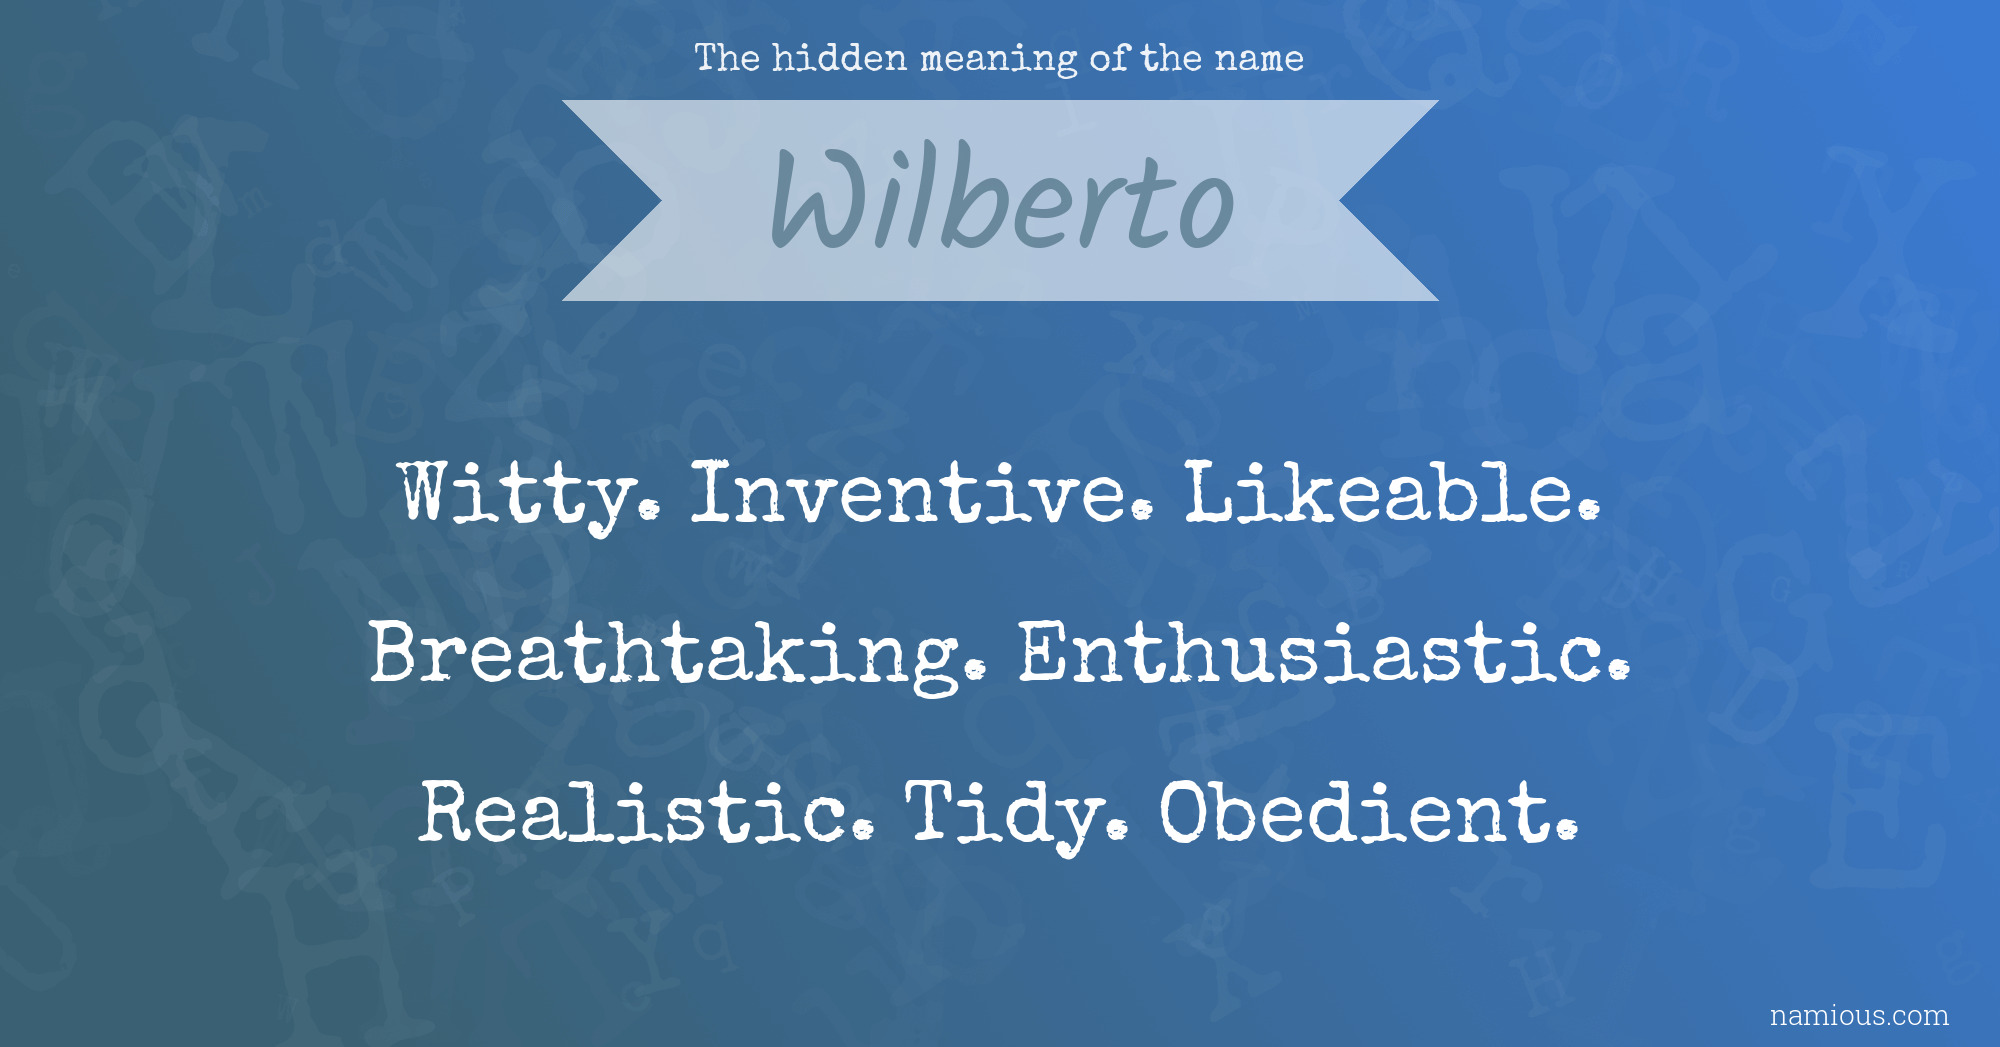 The hidden meaning of the name Wilberto